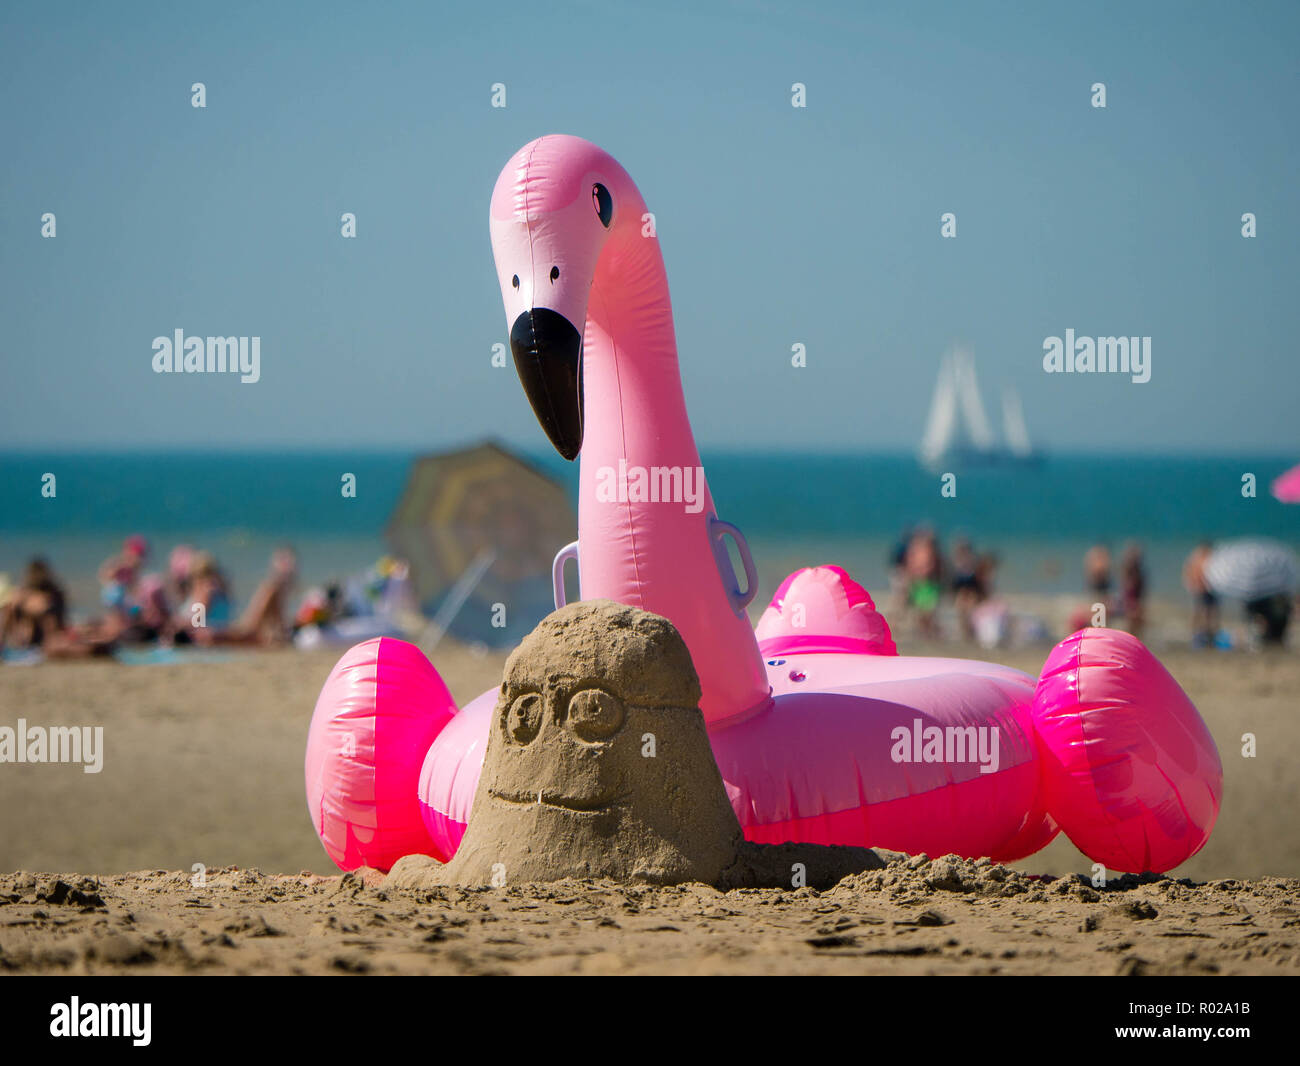 Beach scene during holidays with a sand minion and a inflatable Flamingo in the foreground Stock Photo